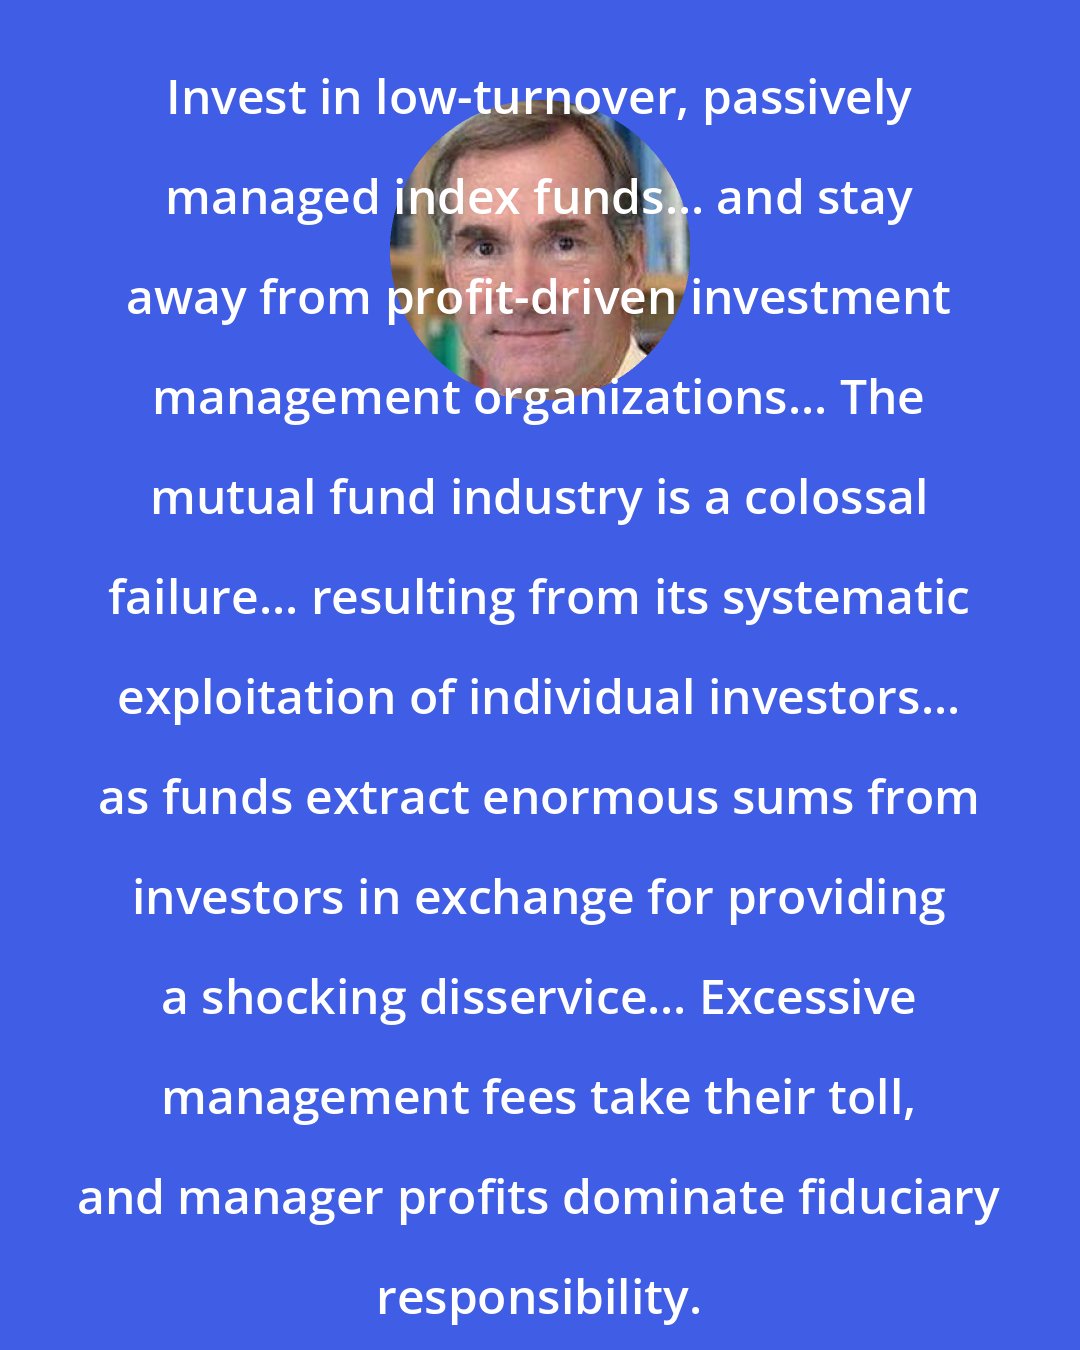 David F. Swensen: Invest in low-turnover, passively managed index funds... and stay away from profit-driven investment management organizations... The mutual fund industry is a colossal failure... resulting from its systematic exploitation of individual investors... as funds extract enormous sums from investors in exchange for providing a shocking disservice... Excessive management fees take their toll, and manager profits dominate fiduciary responsibility.